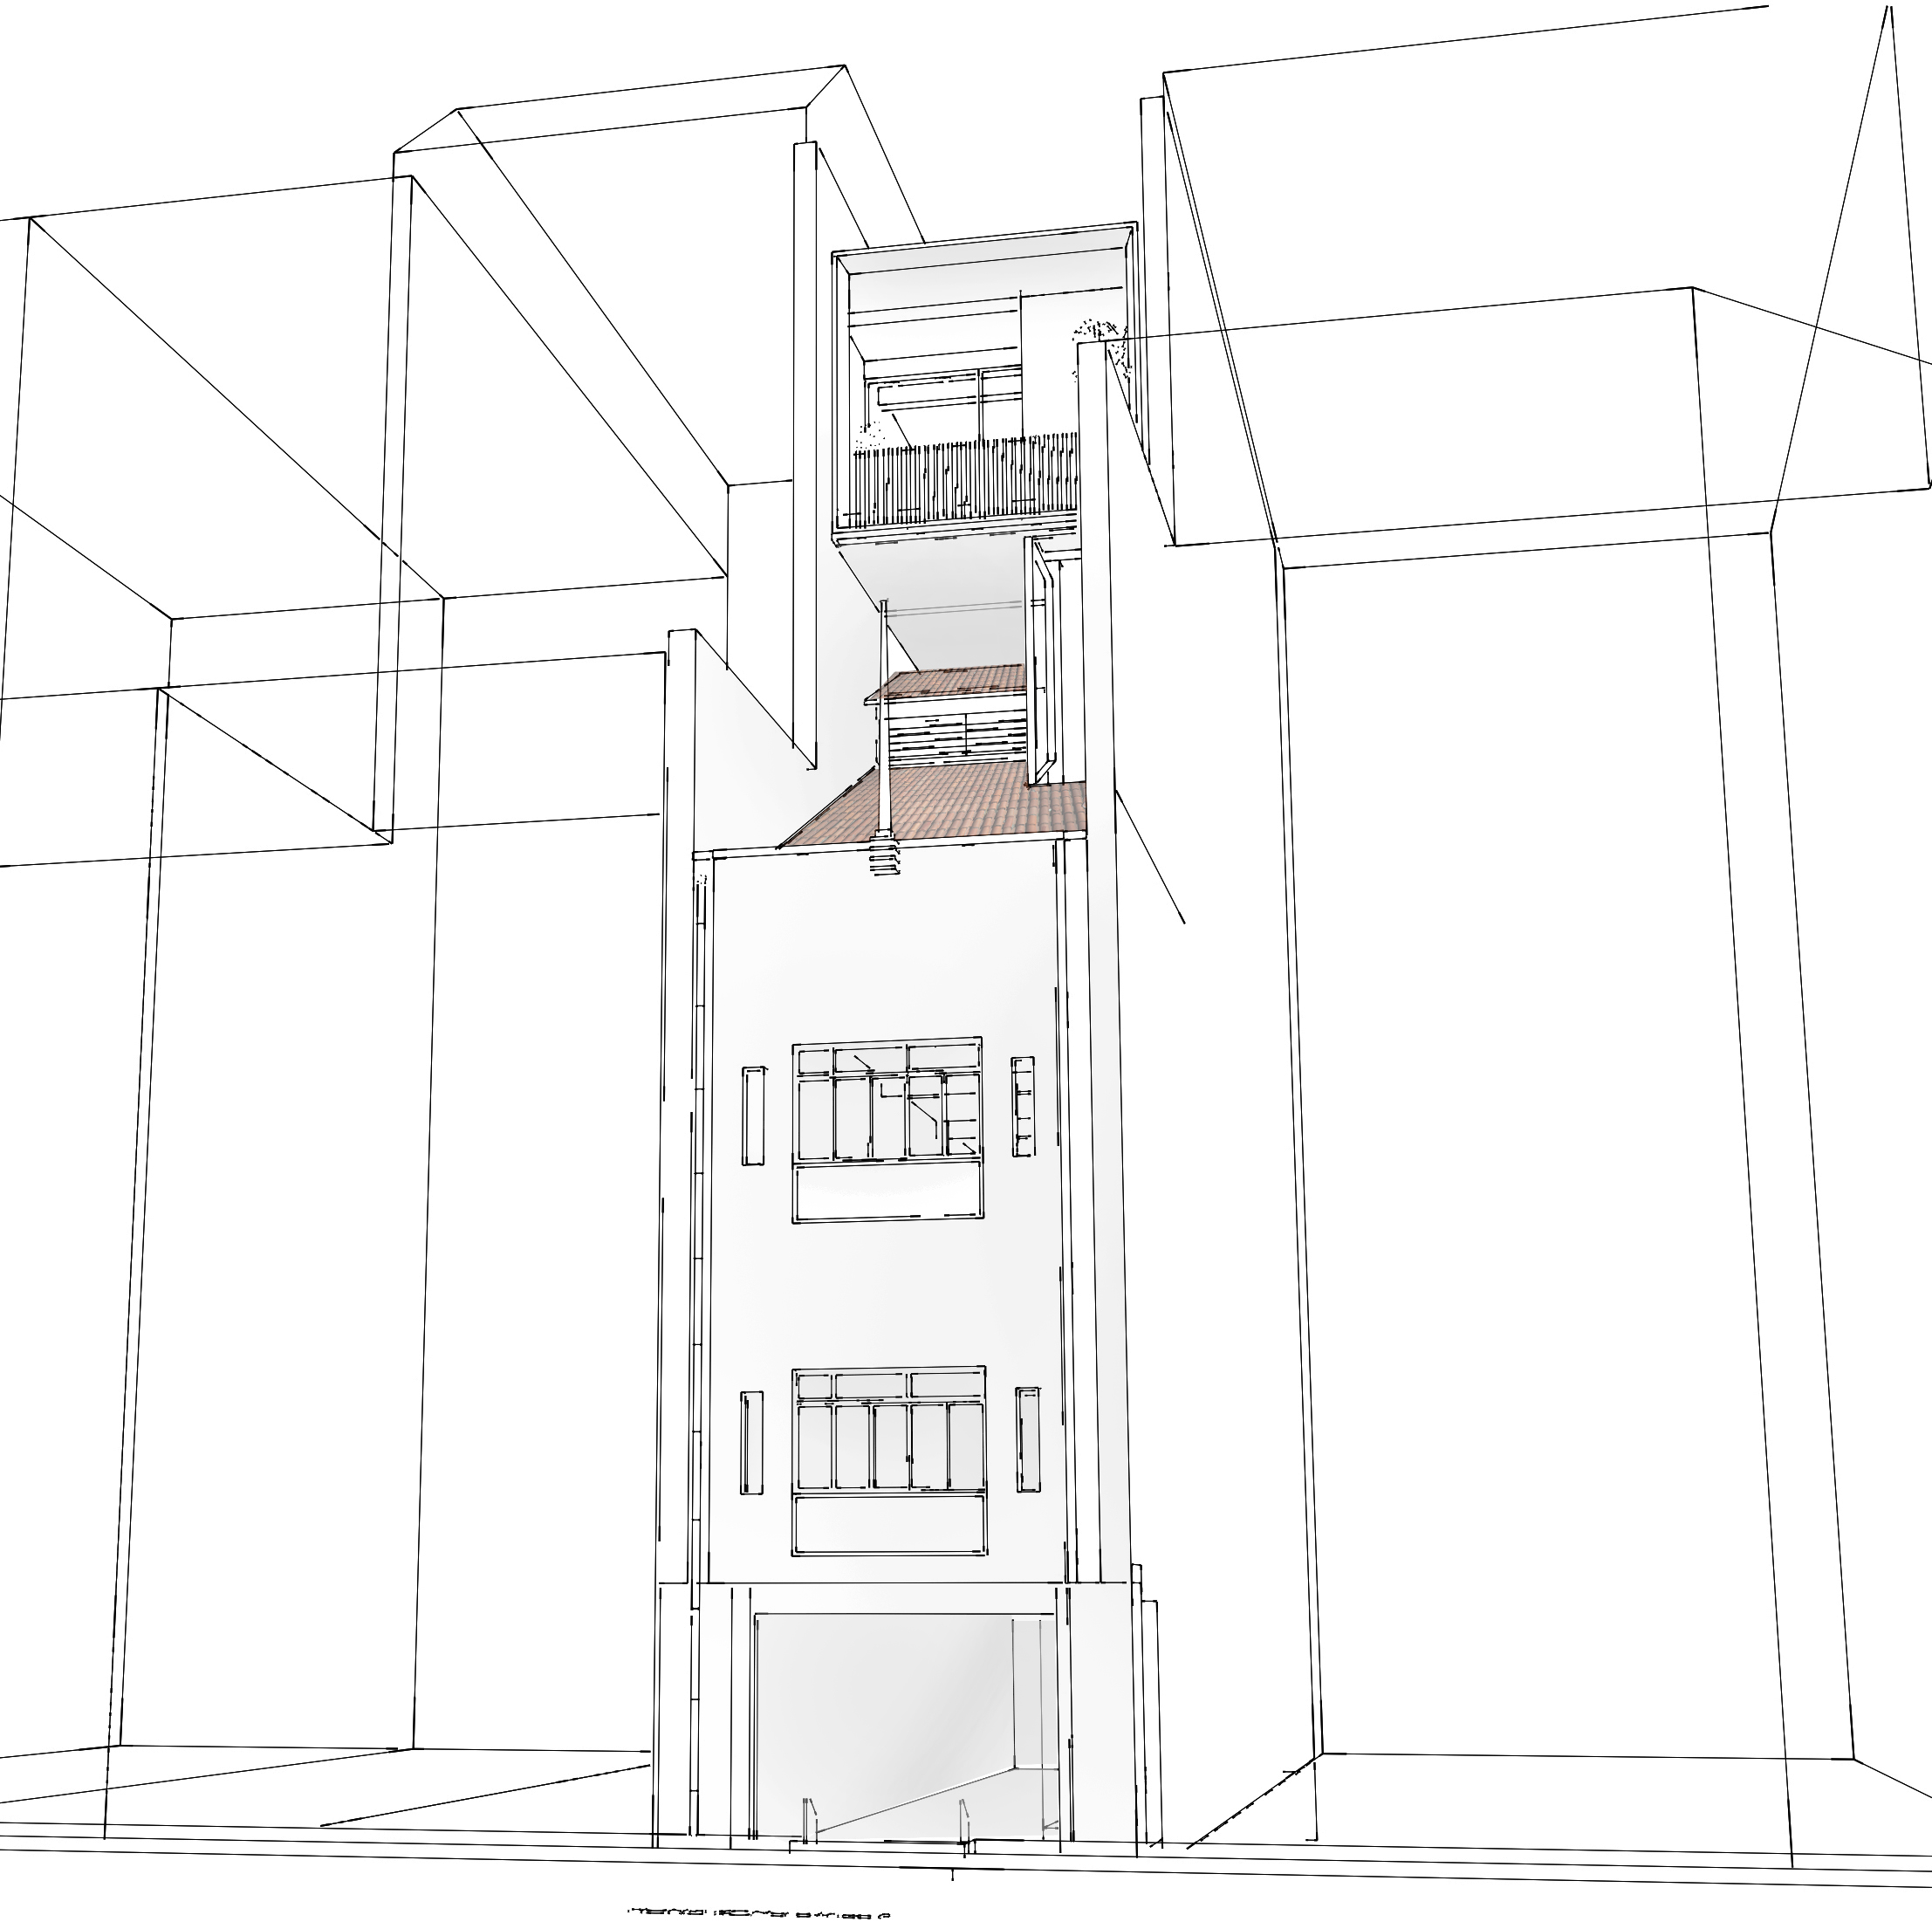 Sketch of the shophouse at Hong Kong street with a six-storey new annex addition